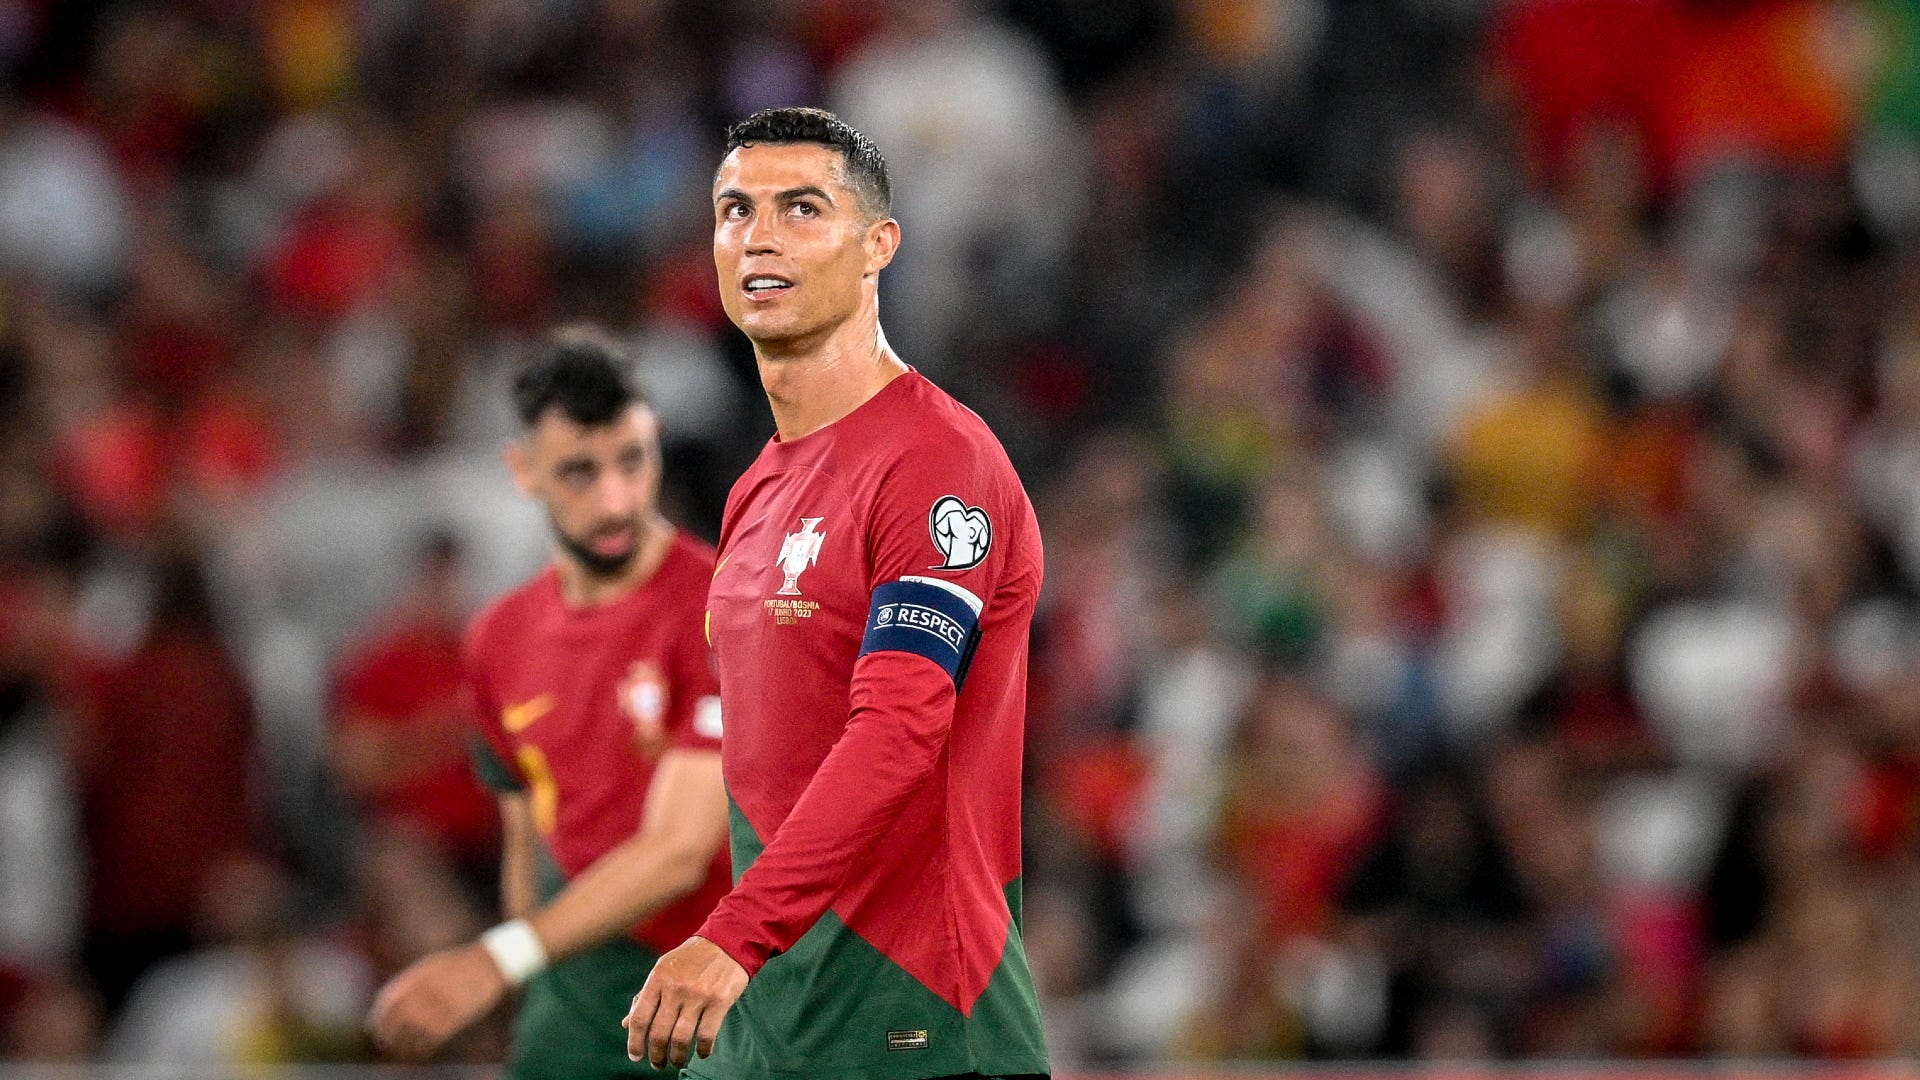 Cristiano Ronaldo returns to Al-Nassr early after Portugal suspension